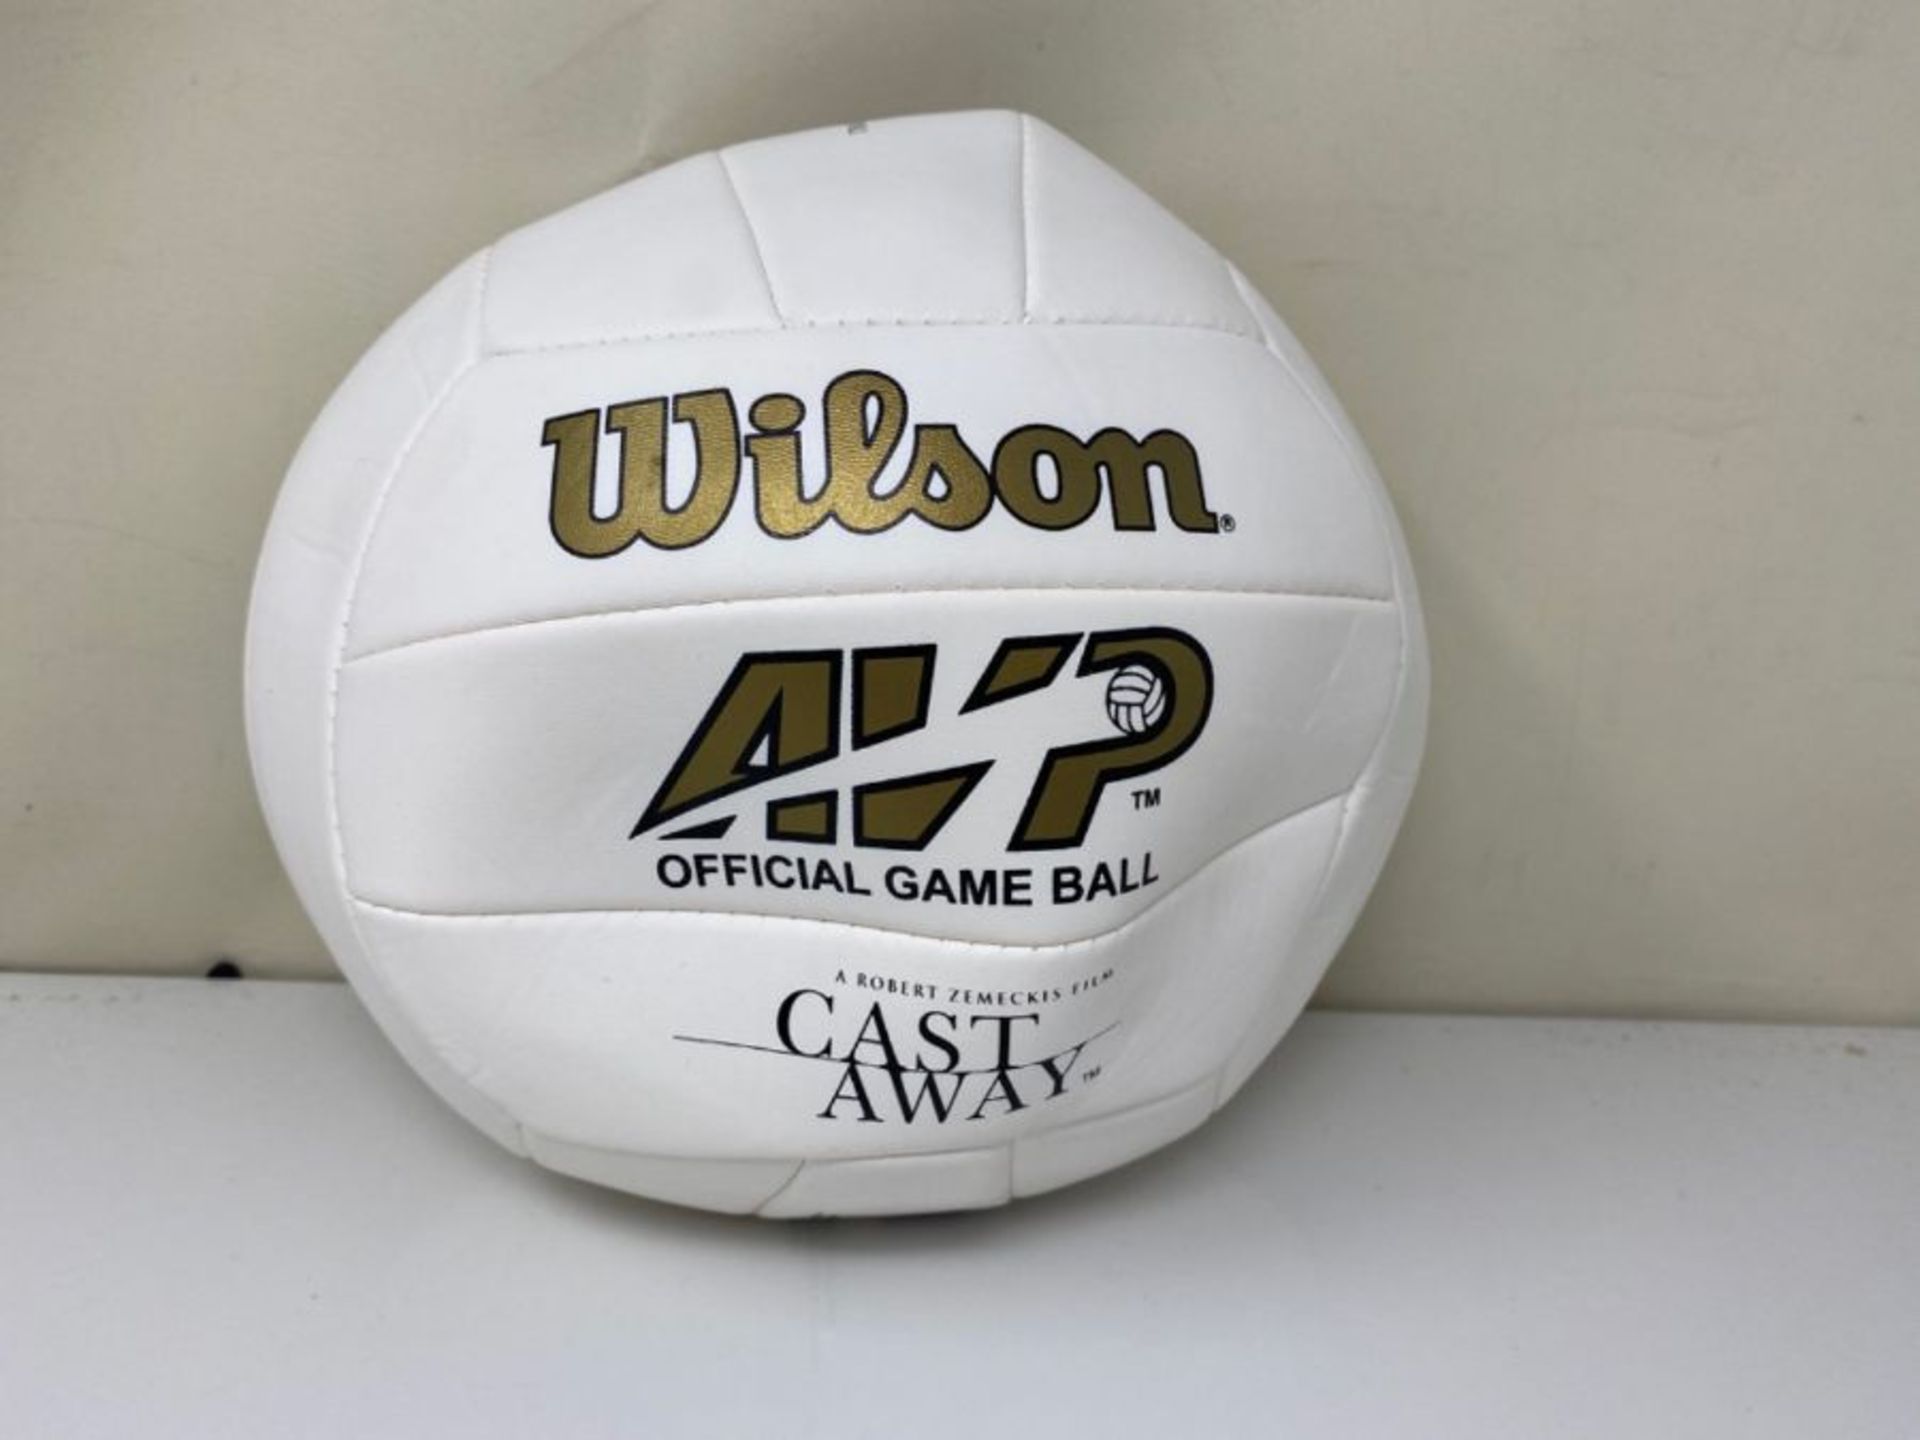 Wilson Castaway Volleyball Ball White 5 - Image 3 of 3